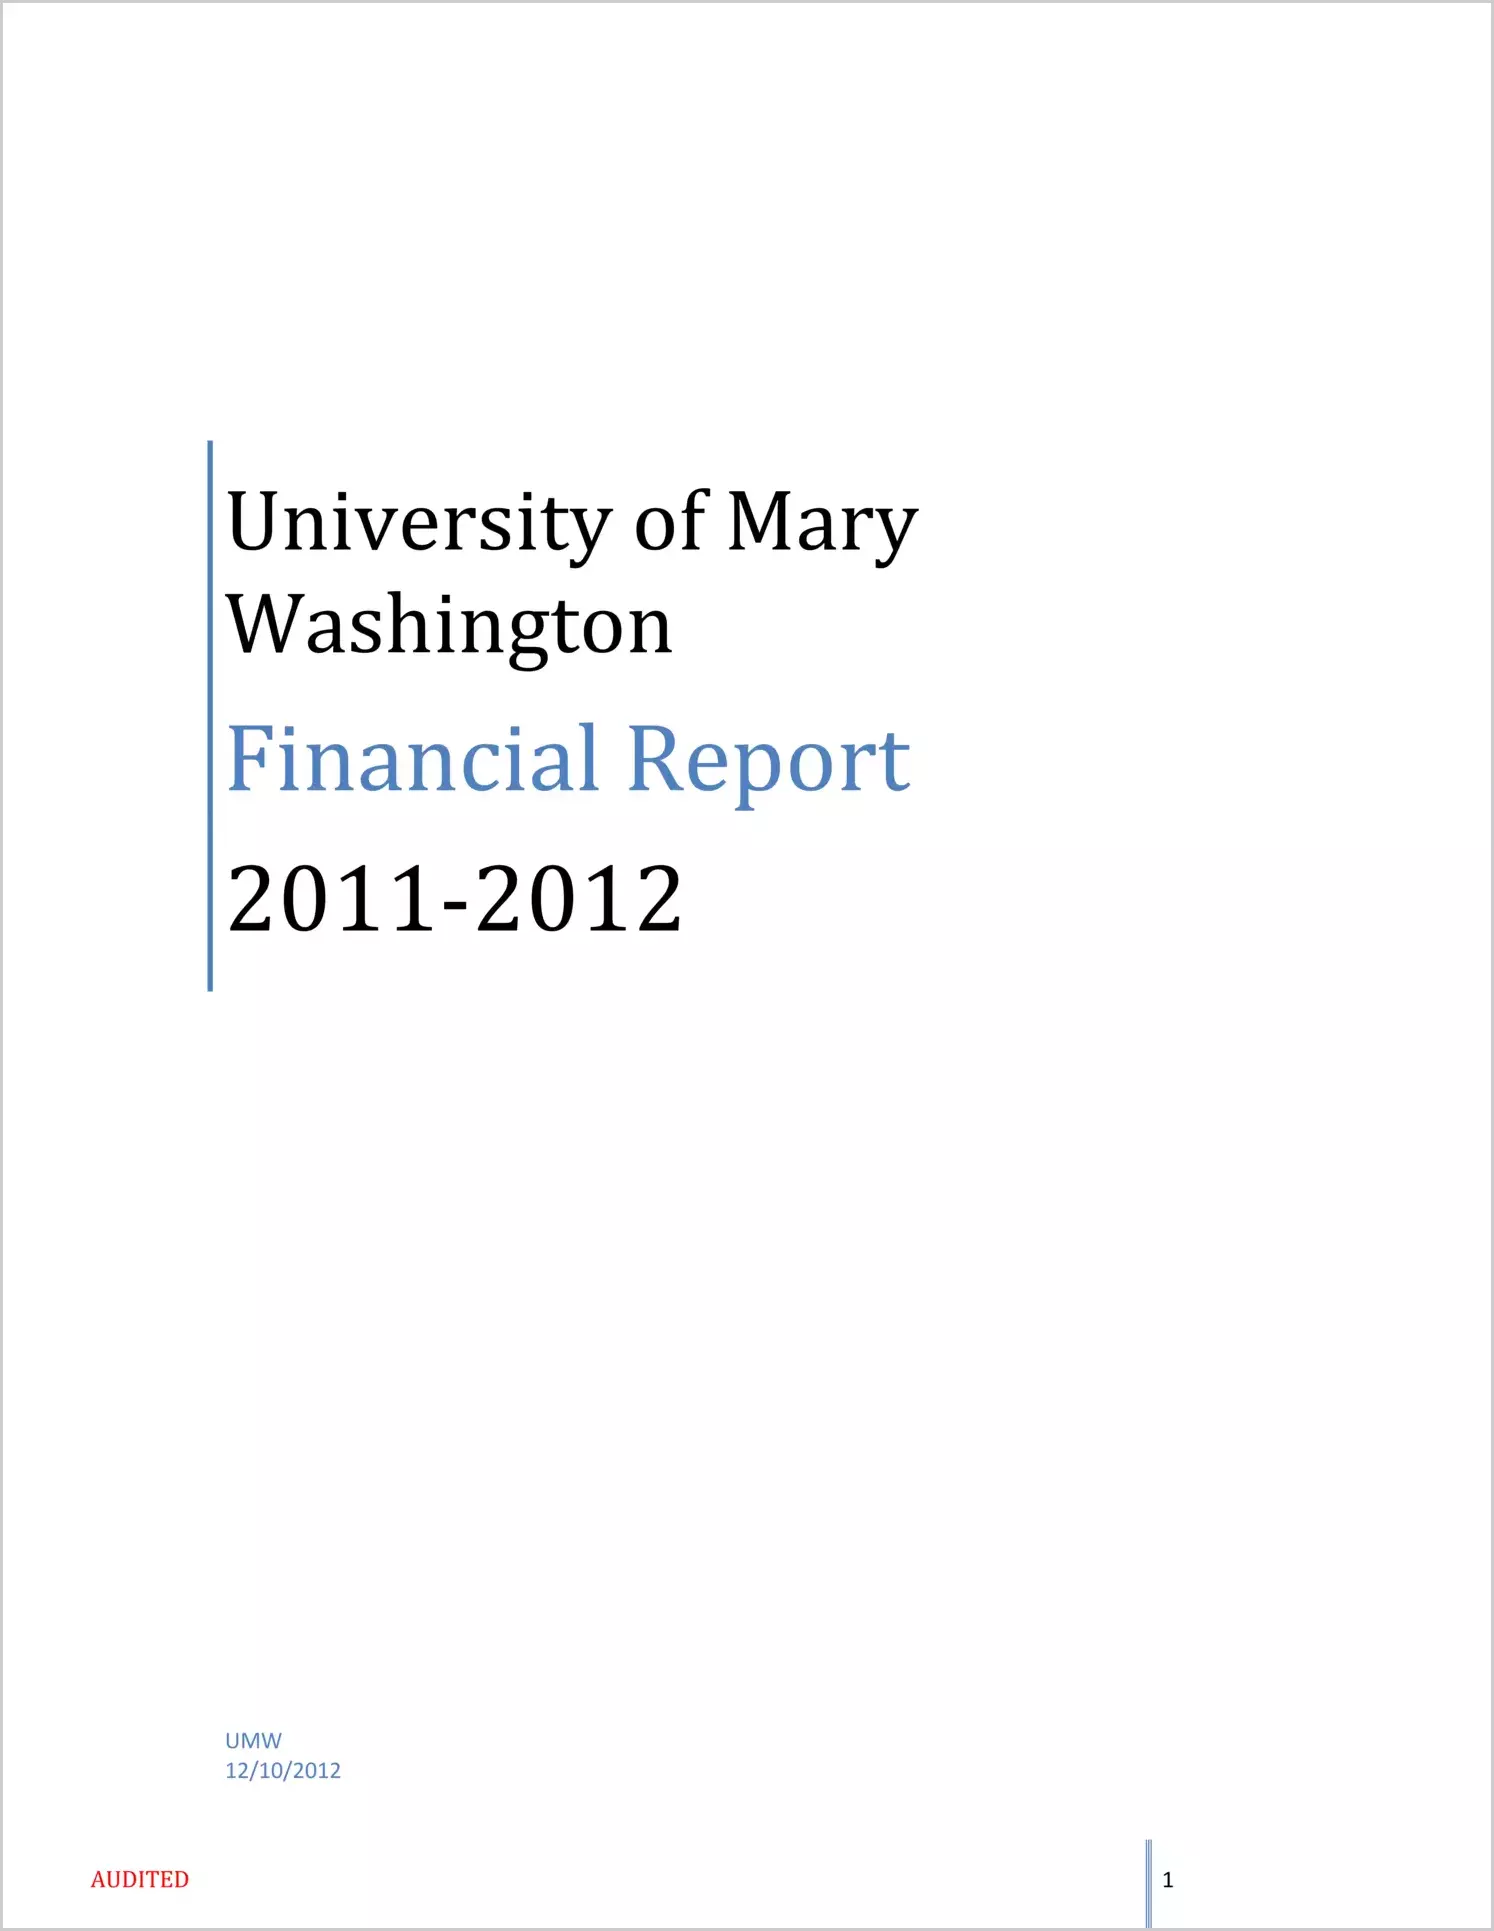 University of Mary Washington Financial Report for the year ended June 30, 2012